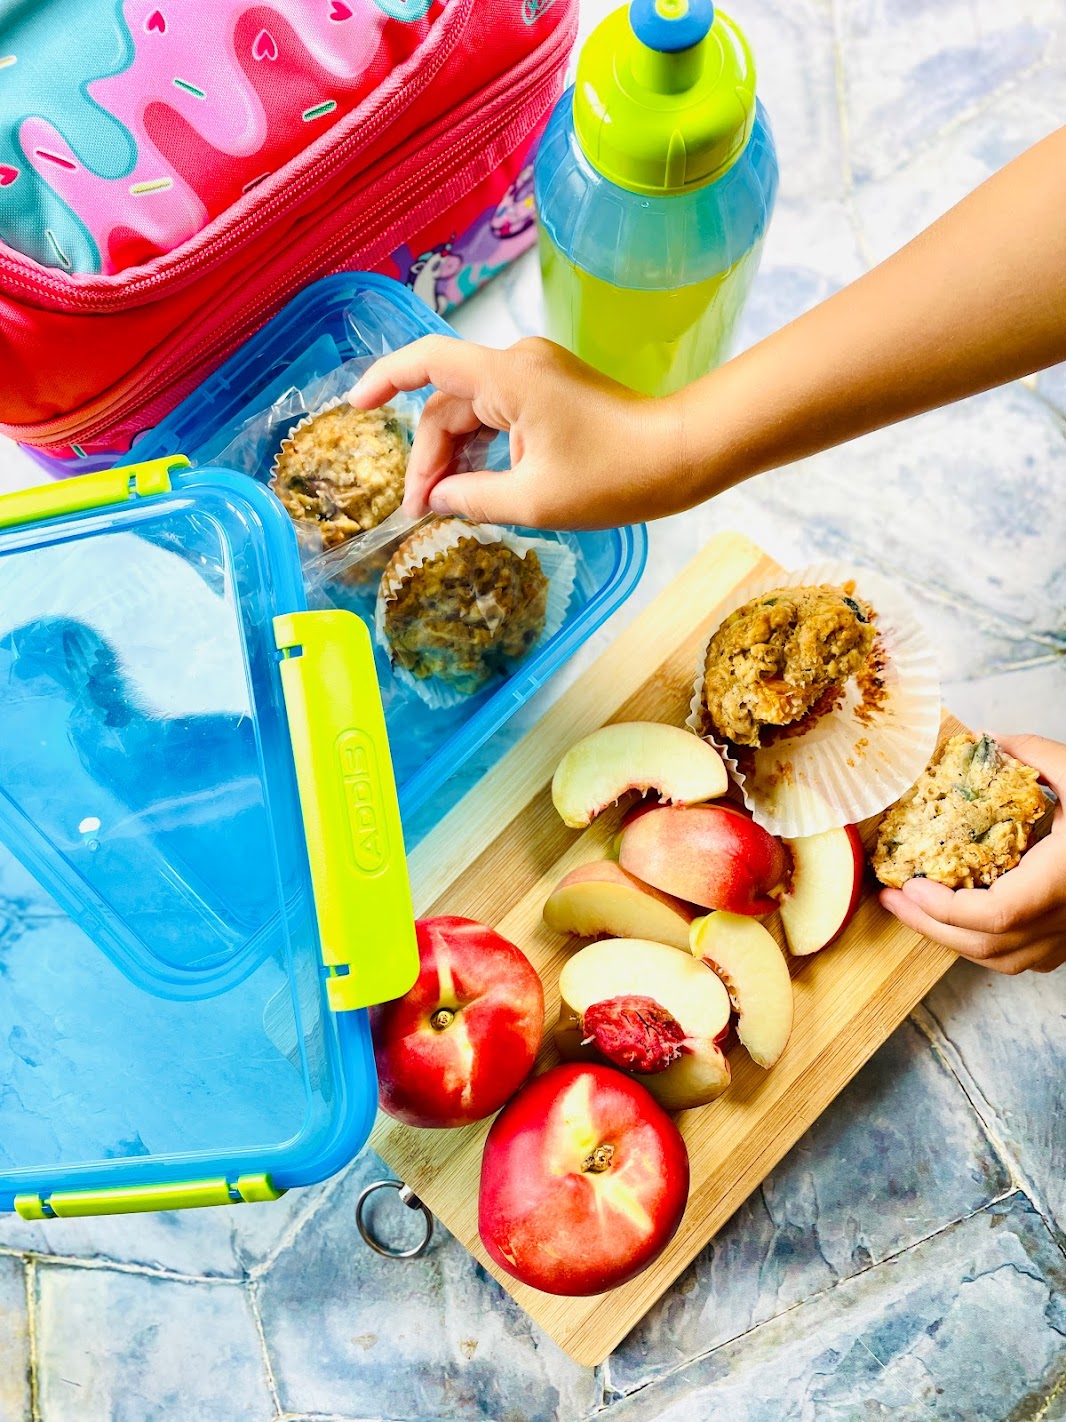 You are currently viewing Fruity back to school lunch box ideas for a healthy start to 2022